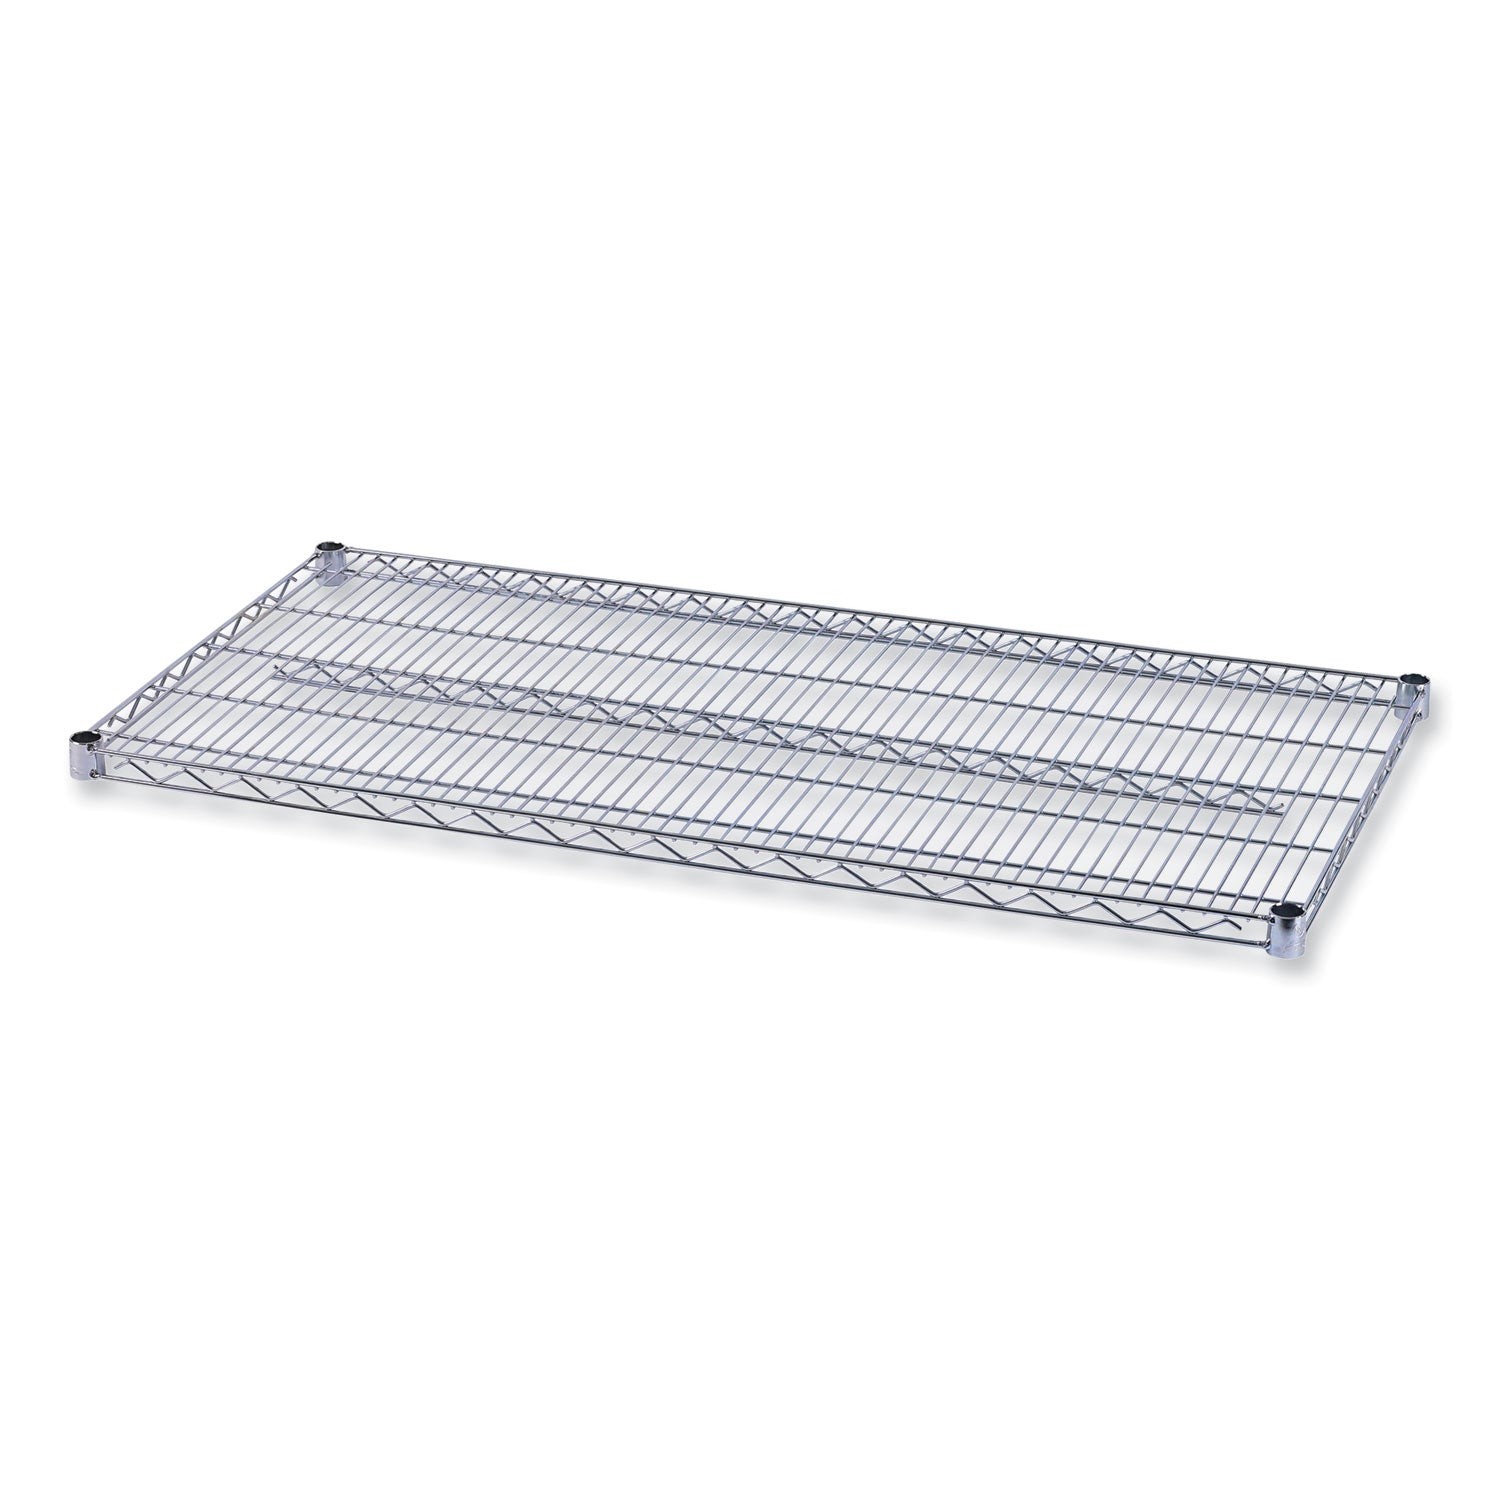 Industrial Wire Shelving Extra Wire Shelves, 48w x 24d, Silver, 2 Shelves/Carton - 